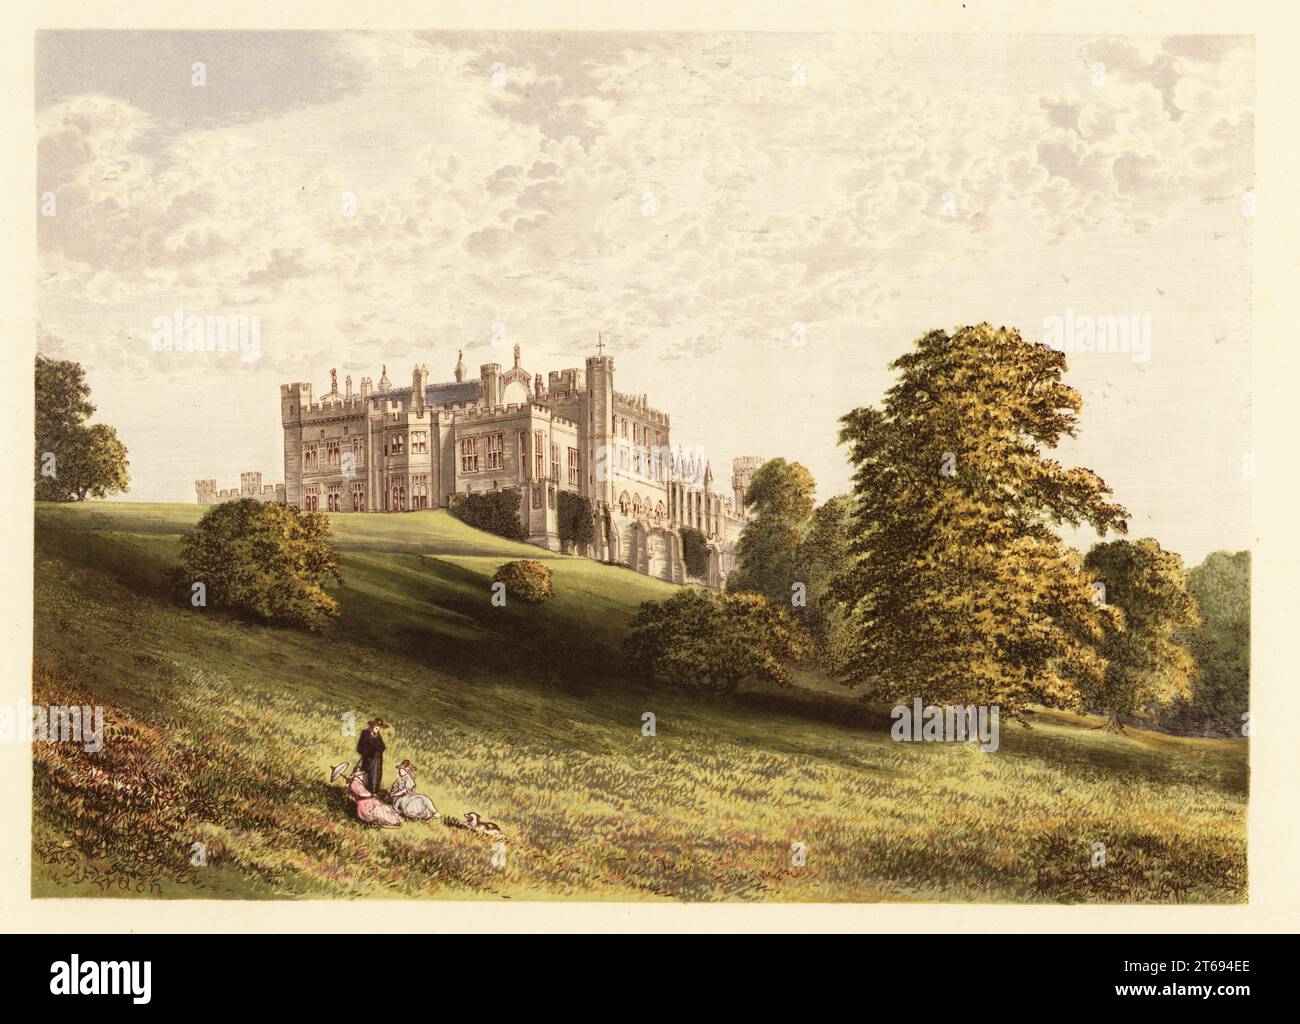 Lambton Castle., County Durham, England. Stately home in the style of a Norman castle built by architect Joseph Bonomi and his son Ignatius Bonomi between 1820 and 1828 for John Lambton, 1st Earl of Durham. Colour woodblock by Benjamin Fawcett in the Baxter process of an illustration by Alexander Francis Lydon from Reverend Francis Orpen Morriss Picturesque Views of the Seats of Noblemen and Gentlemen of Great Britain and Ireland, William Mackenzie, London, 1880. Stock Photo